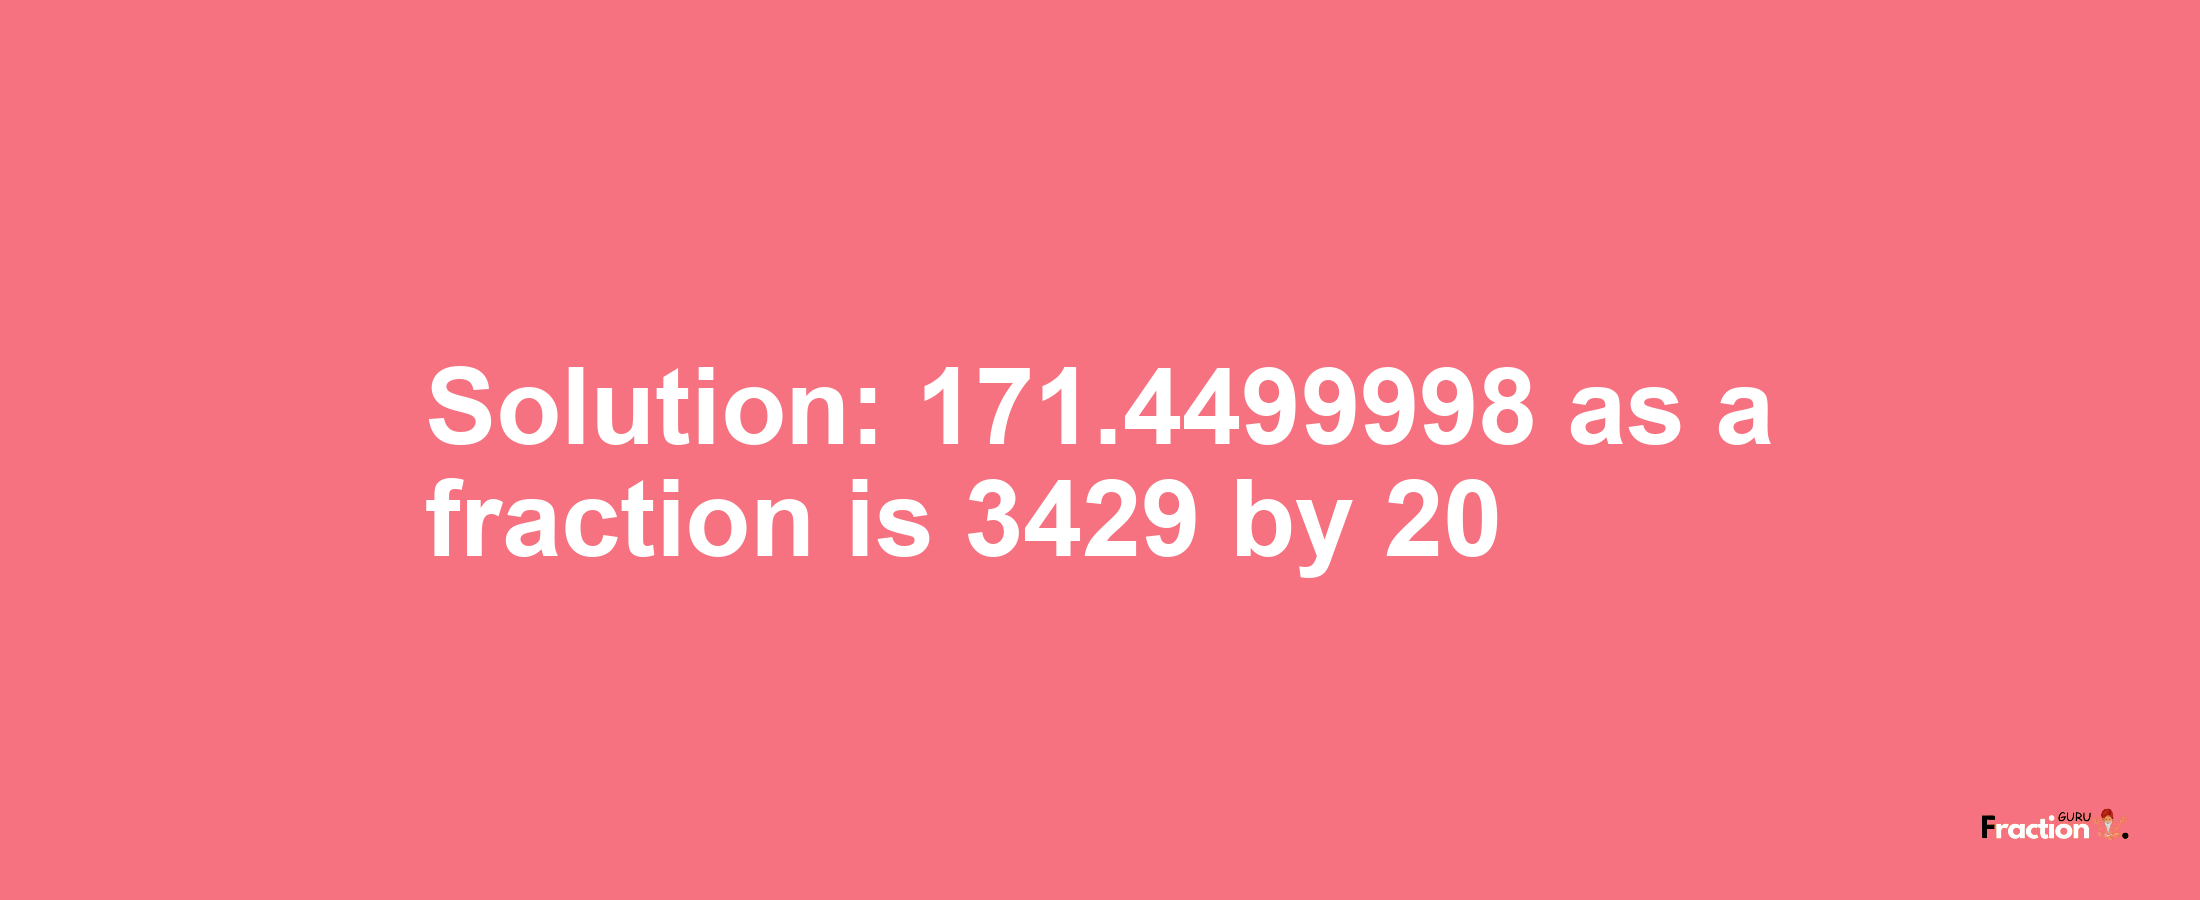 Solution:171.4499998 as a fraction is 3429/20